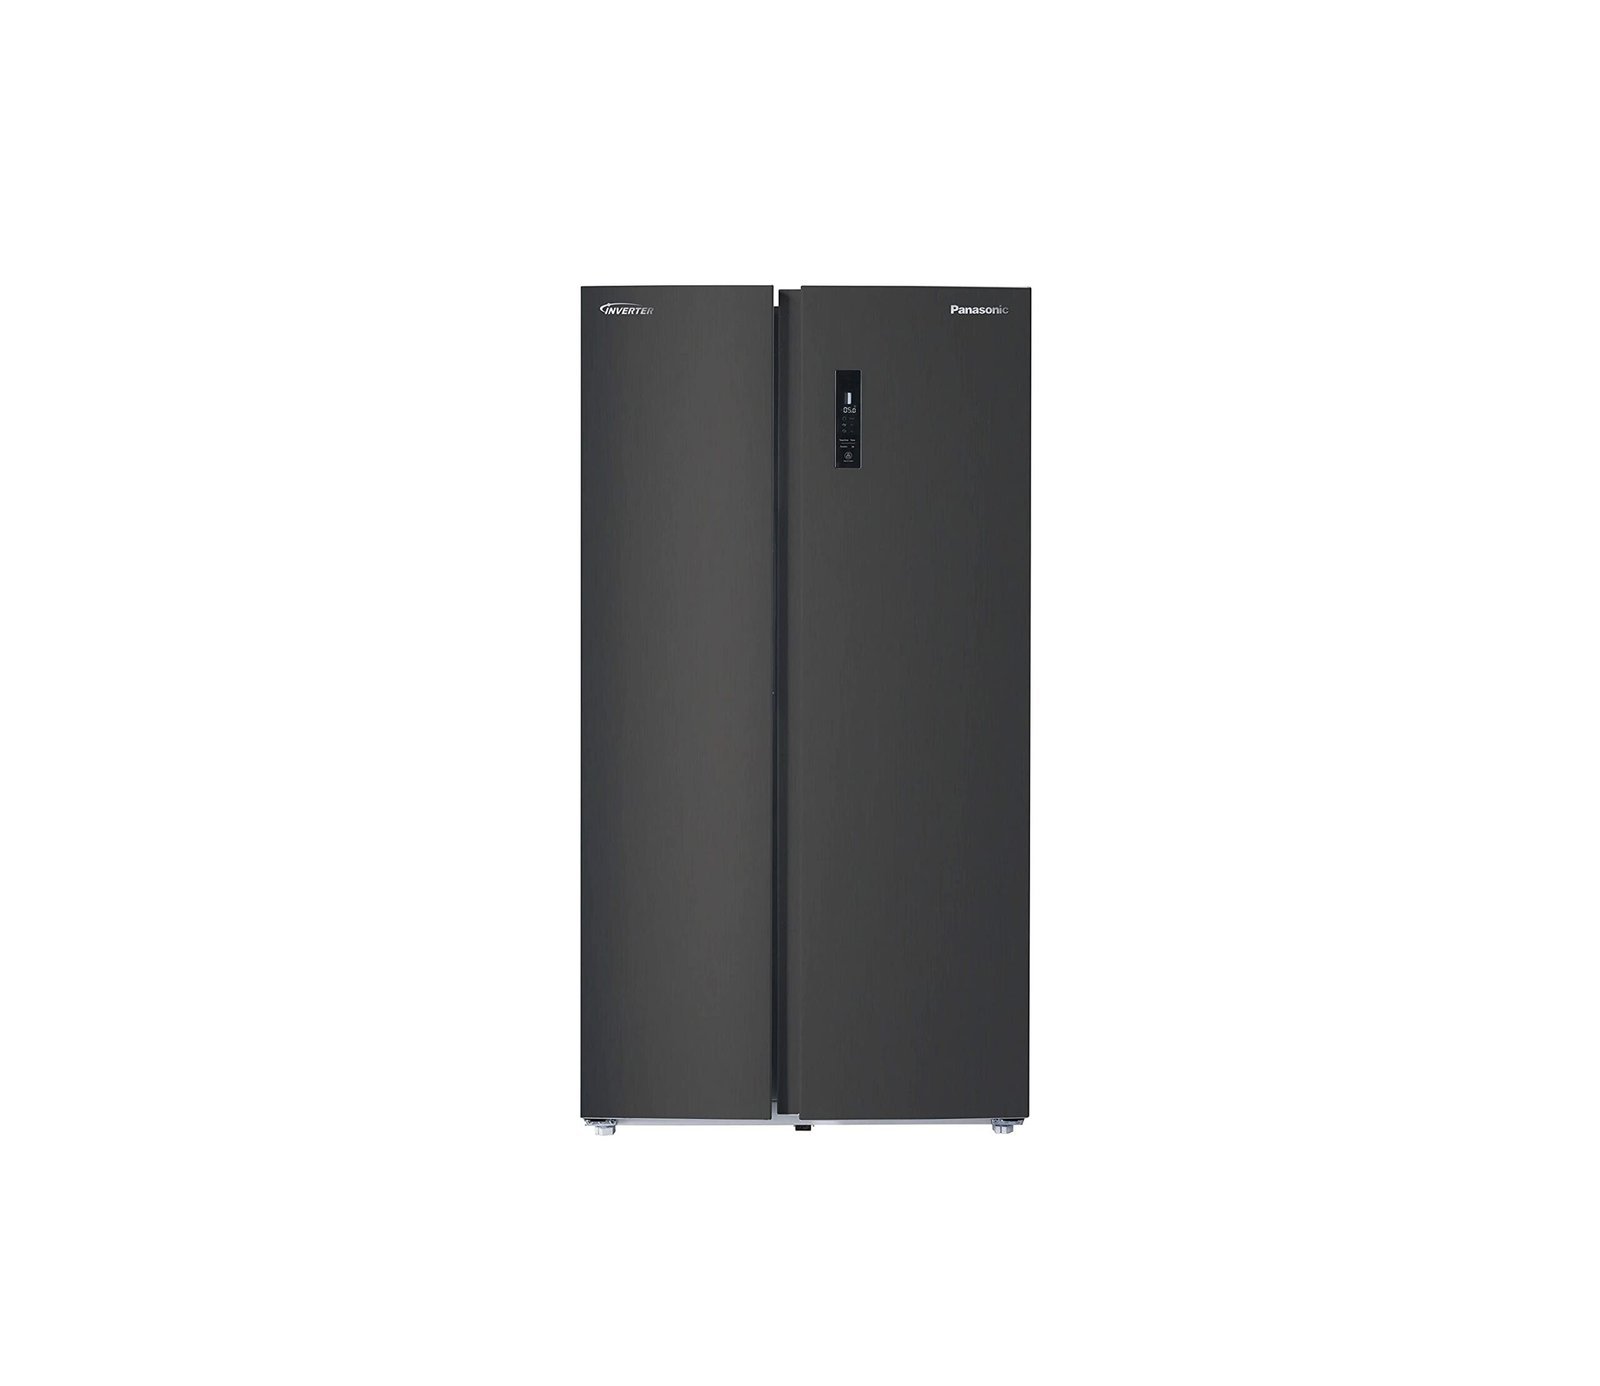 Panasonic 562 Litres Side By Side Refrigerator MAT Black Model-NR-BS734MS | 1 Year Full 10 Year Compressor Warranty.